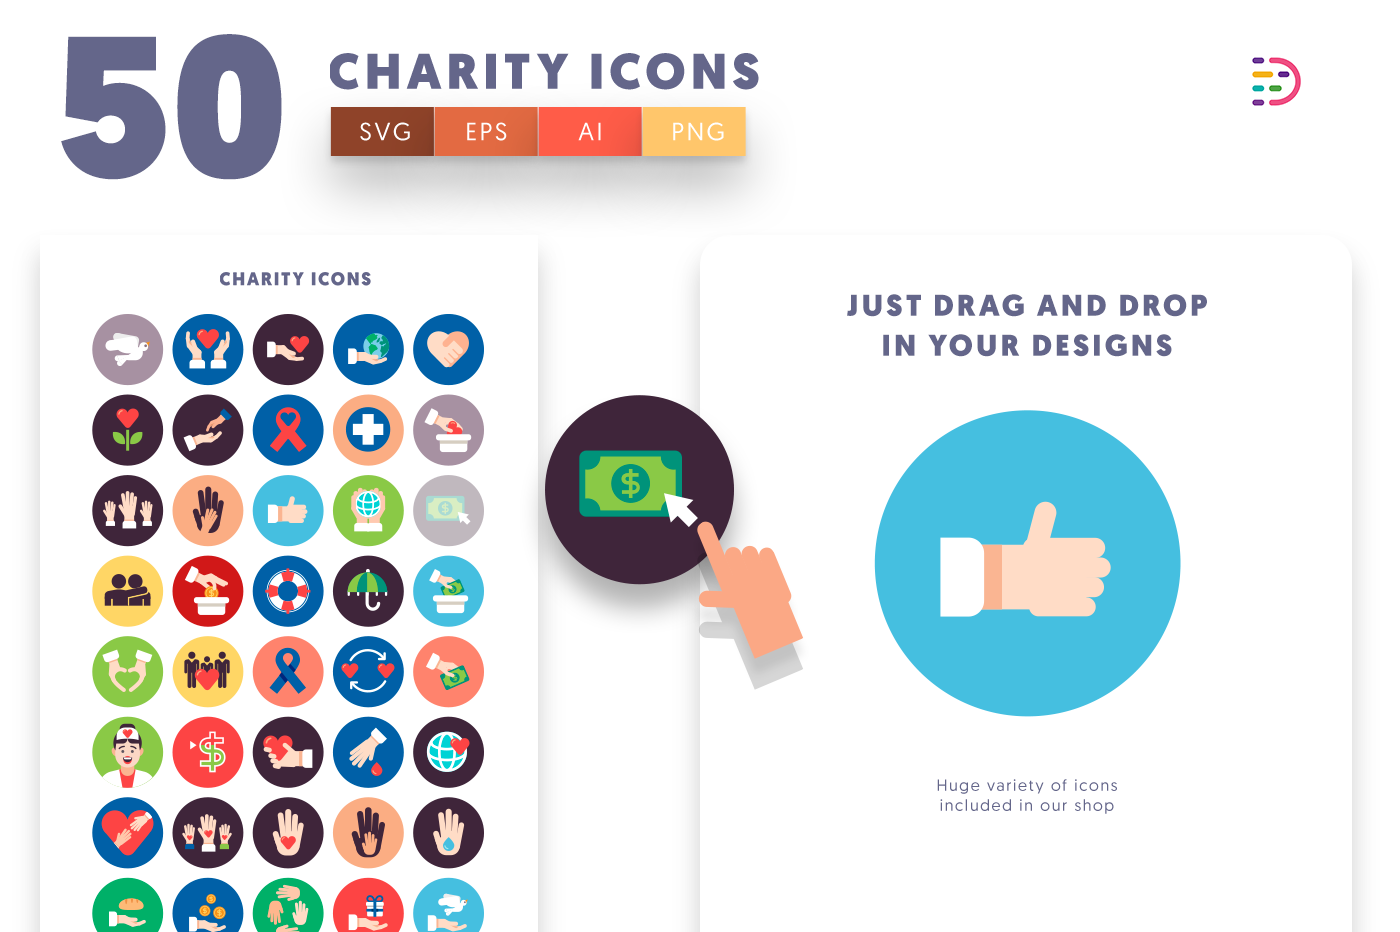 Design ready 50 Charity Icons